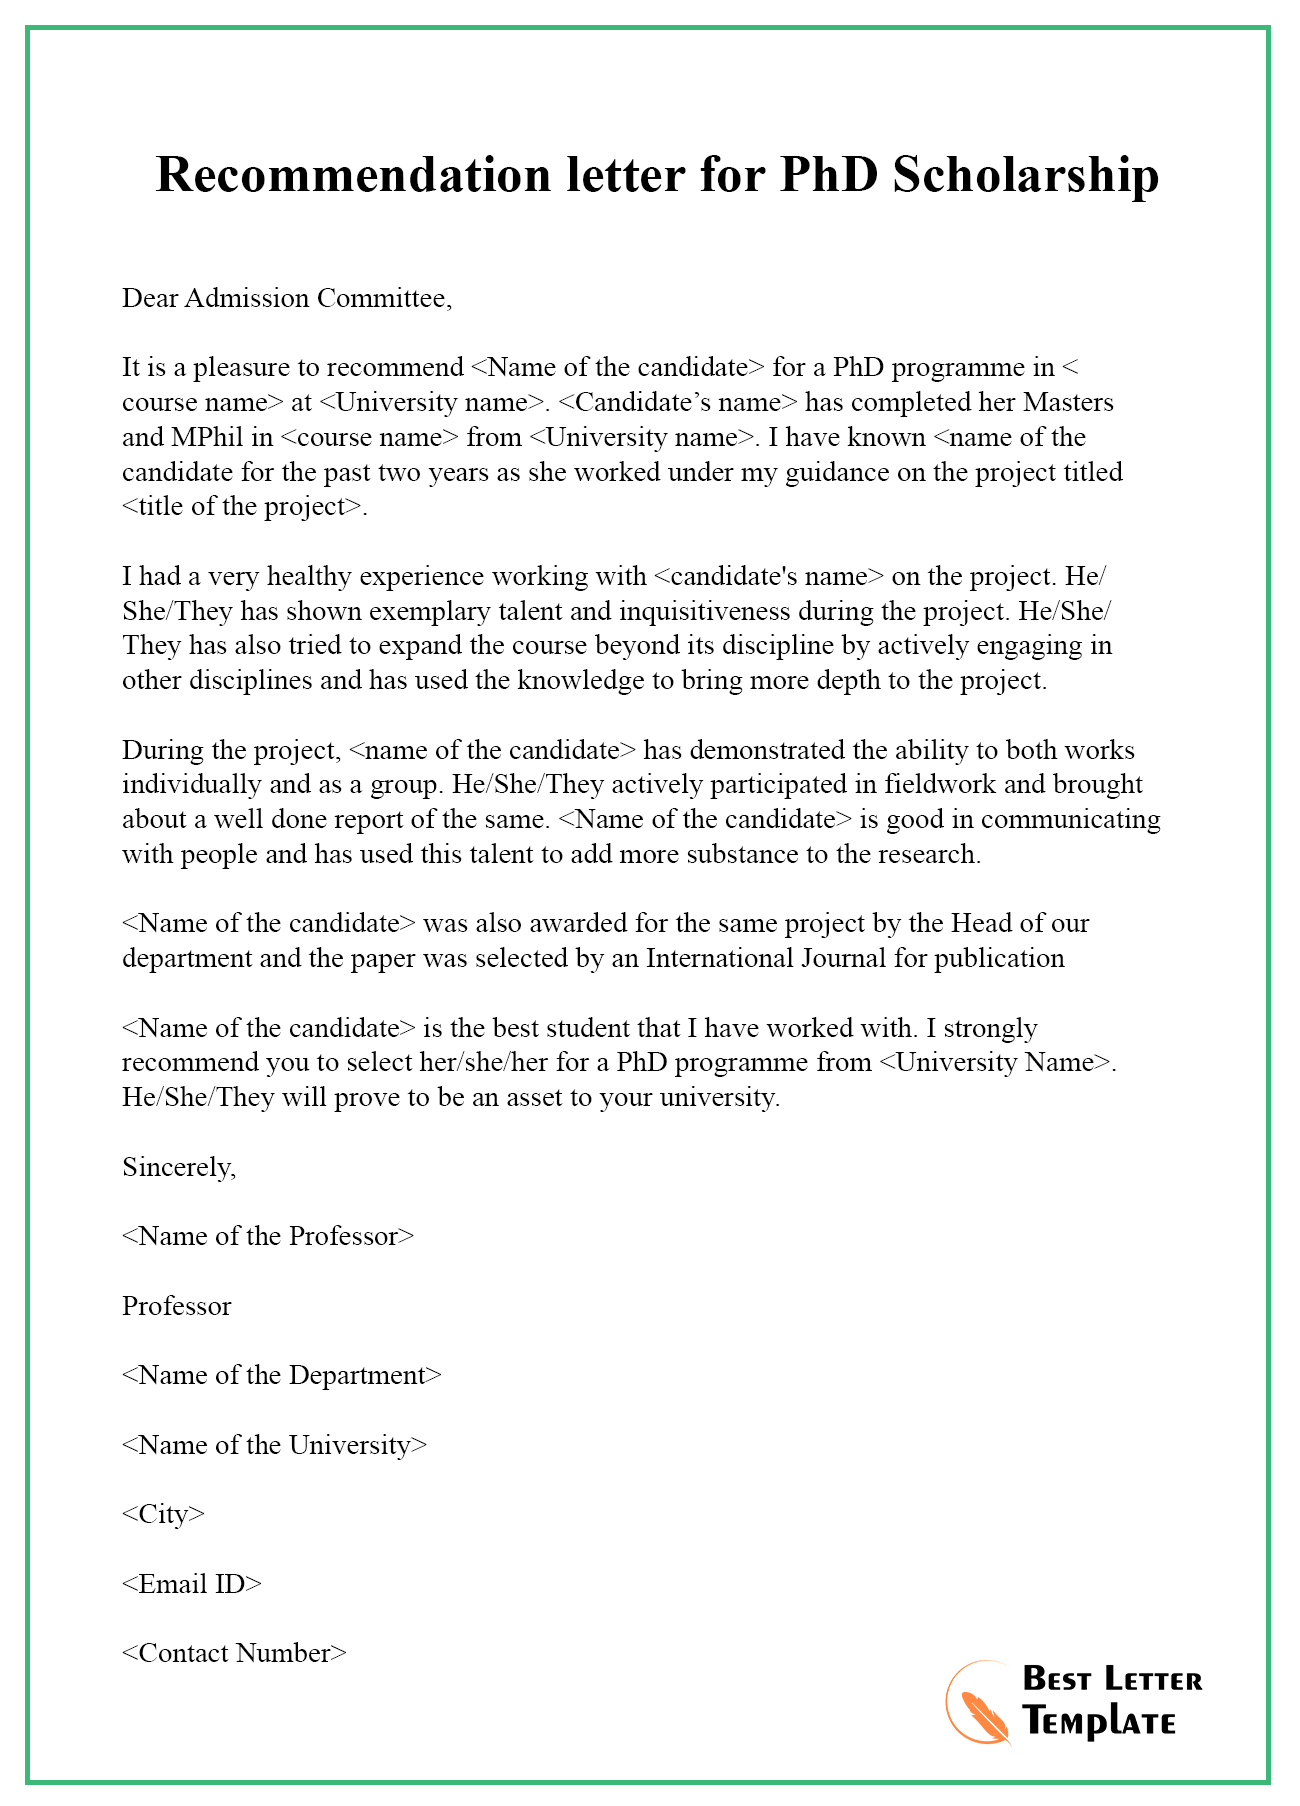 Recommendation Letter For Phd Scholarship Best Letter Template intended for proportions 1300 X 1806